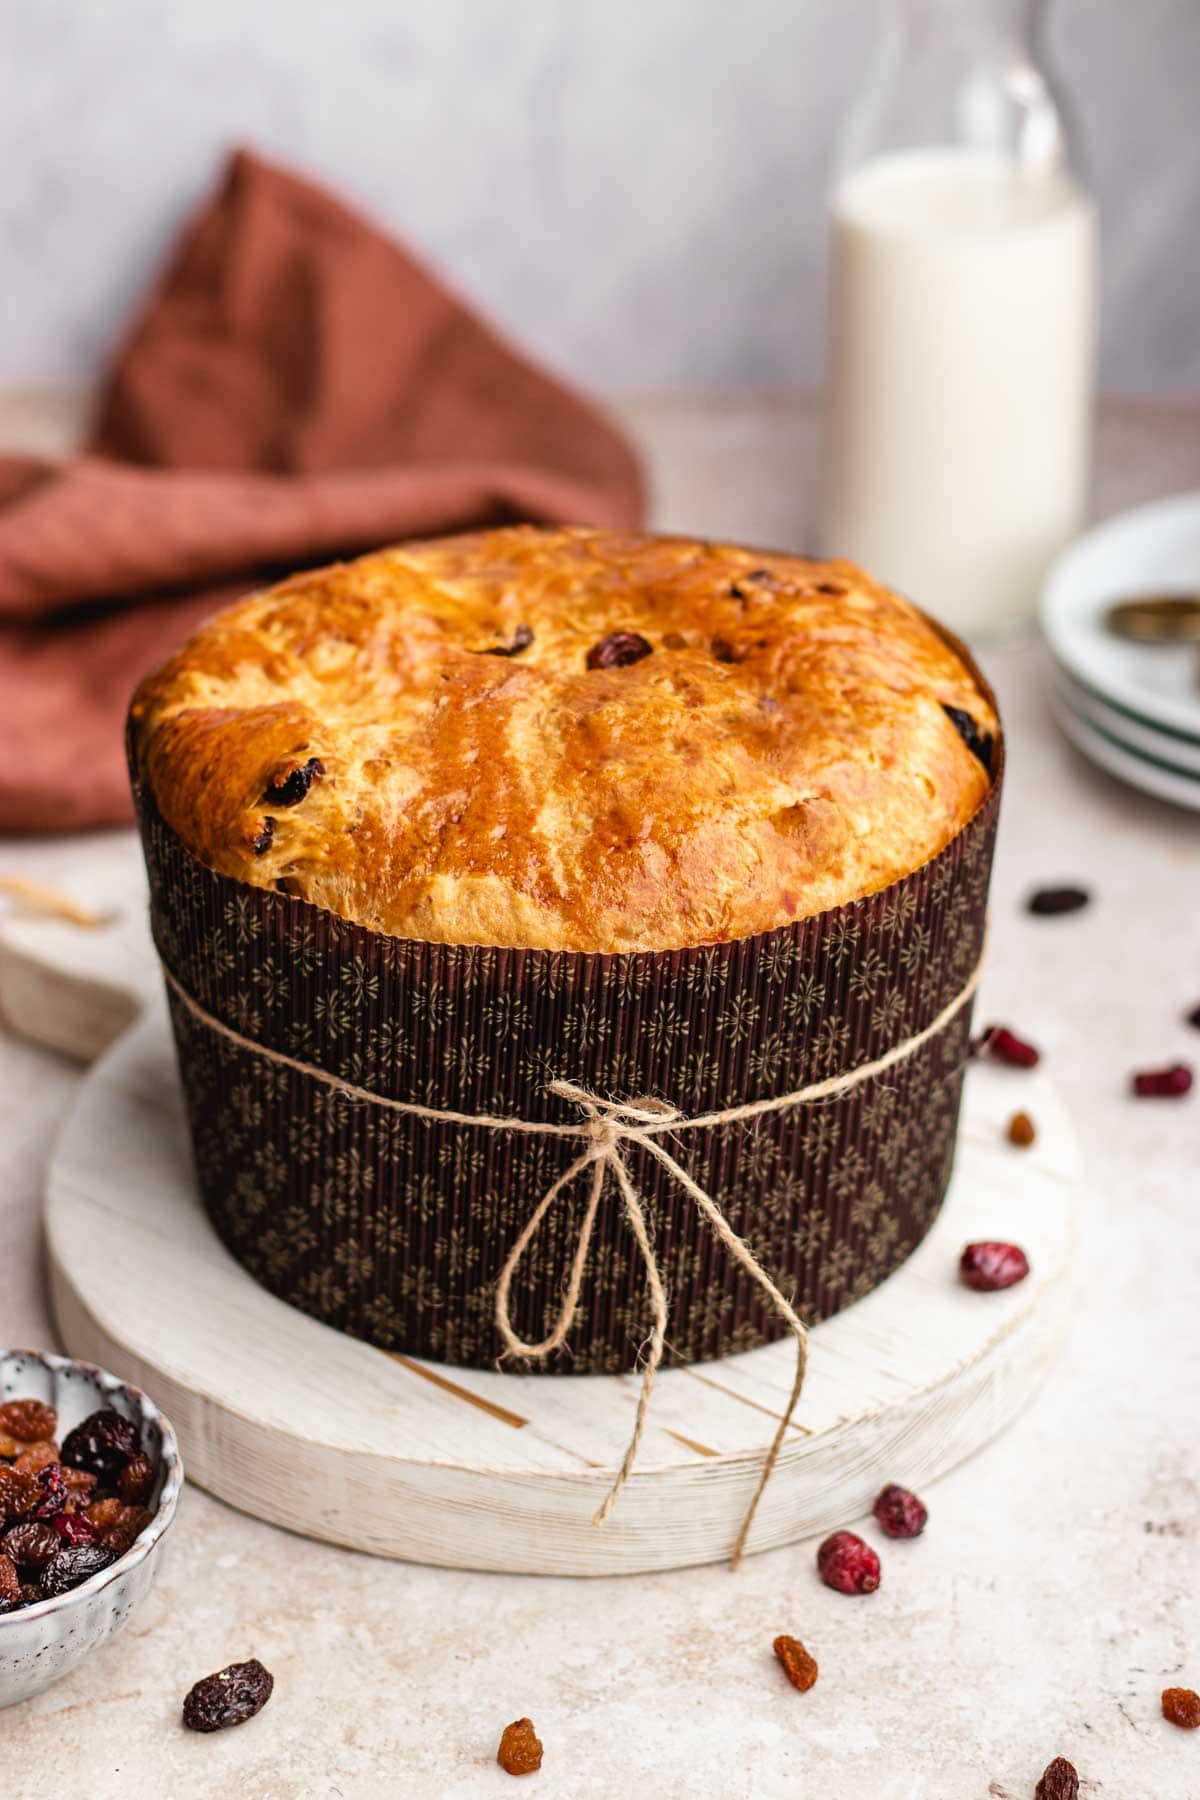 Panettone baked loaf in brown paper mold with string wrapped around the middle, foreground decorated with mixed fruit and nuts